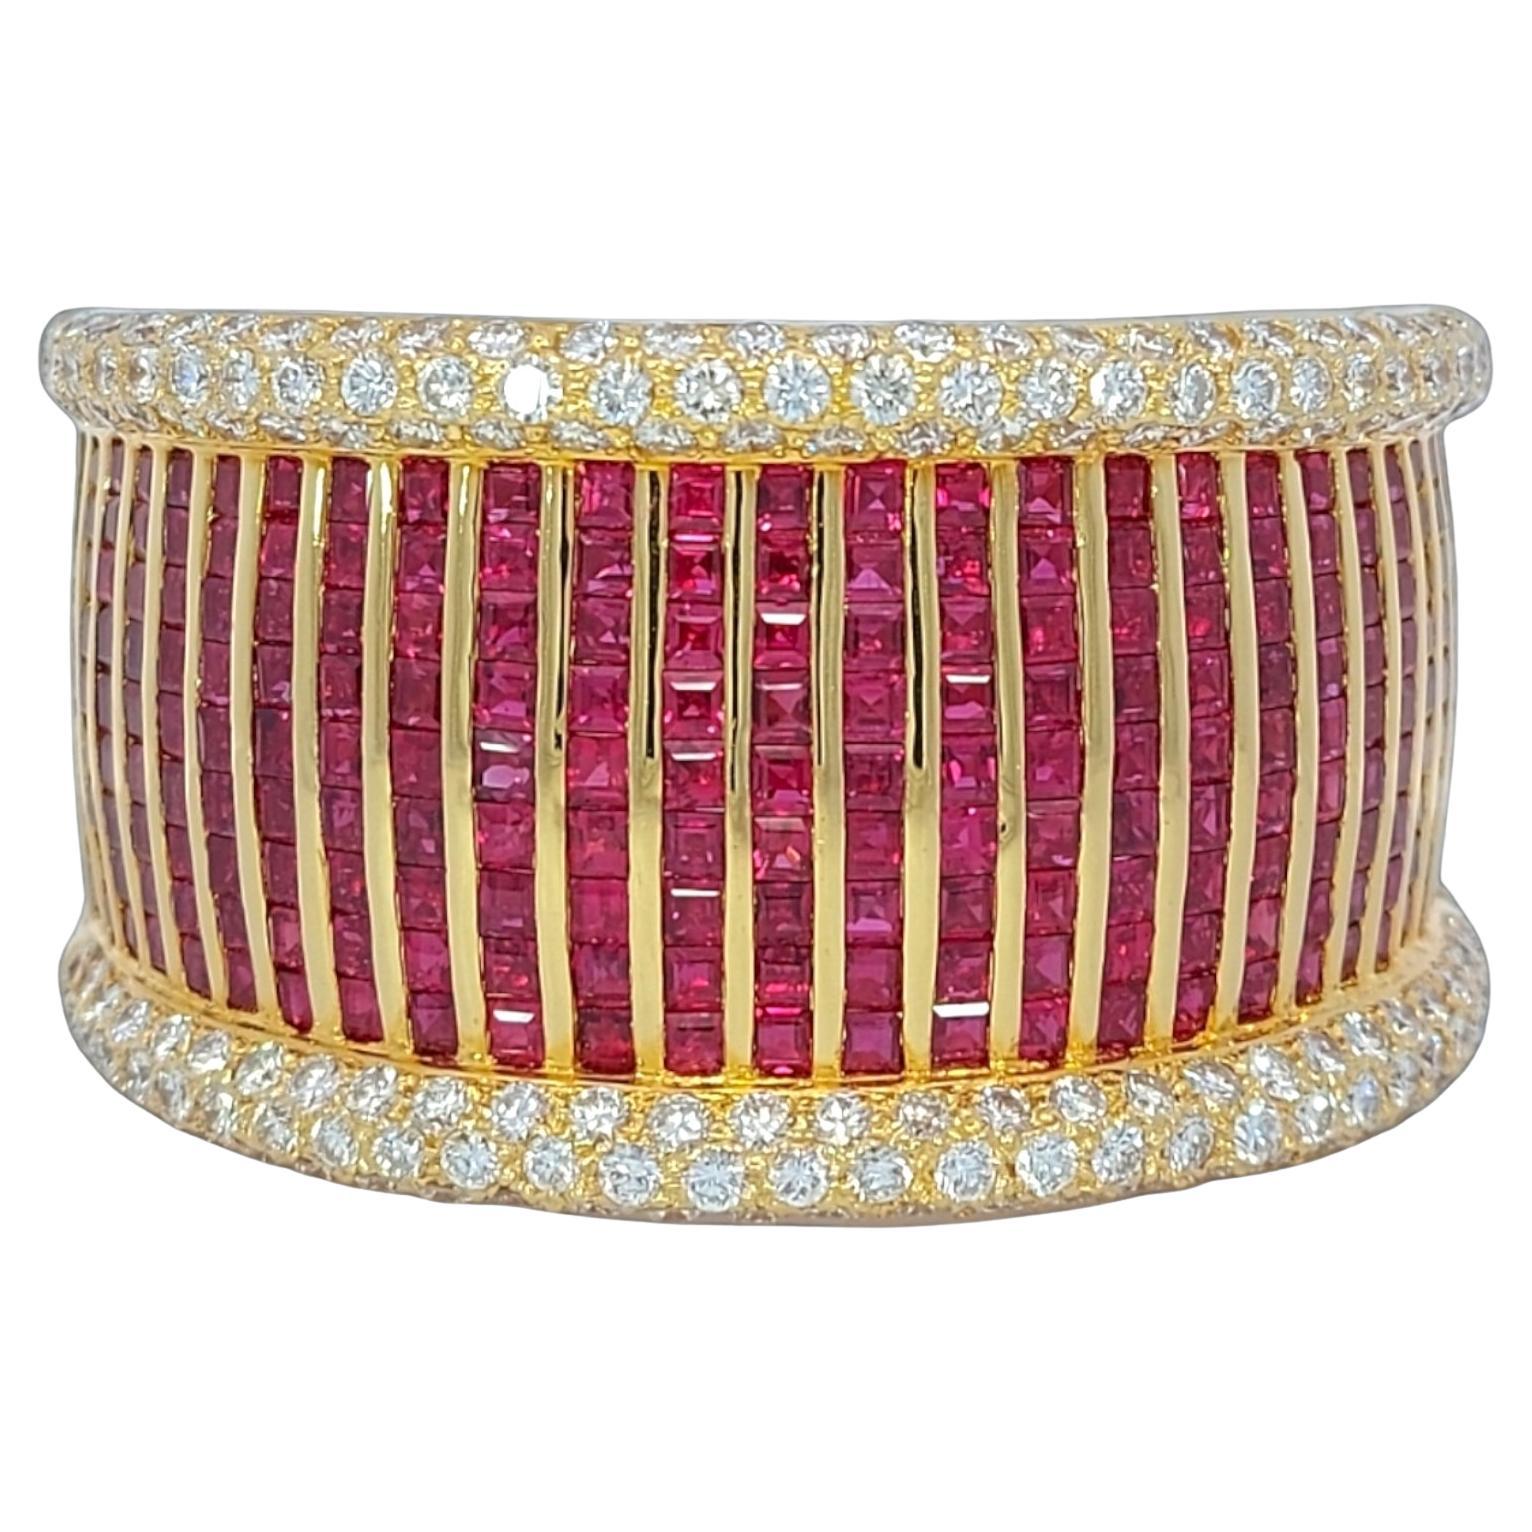 Adler Geneva set of Bracelet, Earrings, Ring in 18kt Yellow Gold With Rubies & Diamonds from Estate of His Majesty Sultan of Oman Qaboos Bin Said

Qaboos bin Said Al Said was Sultan of Oman from 23 July 1970 until his death in